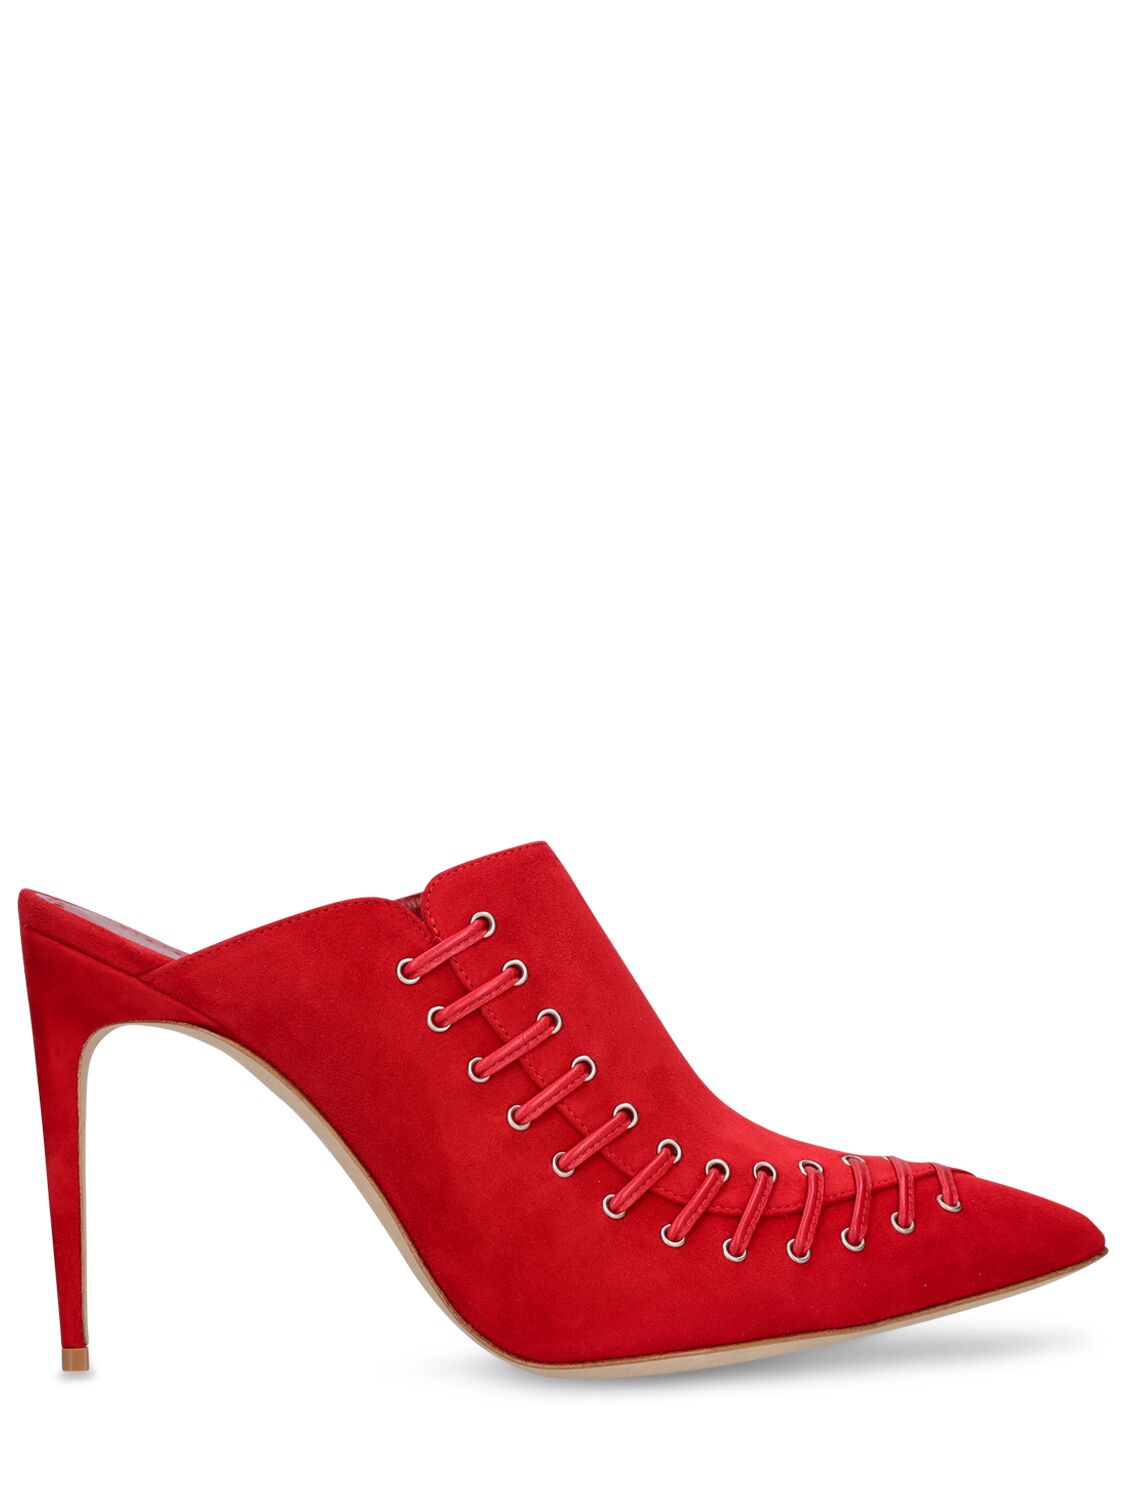 Manolo Blahnik 105mm Dobre Suede Mules In Bright Red